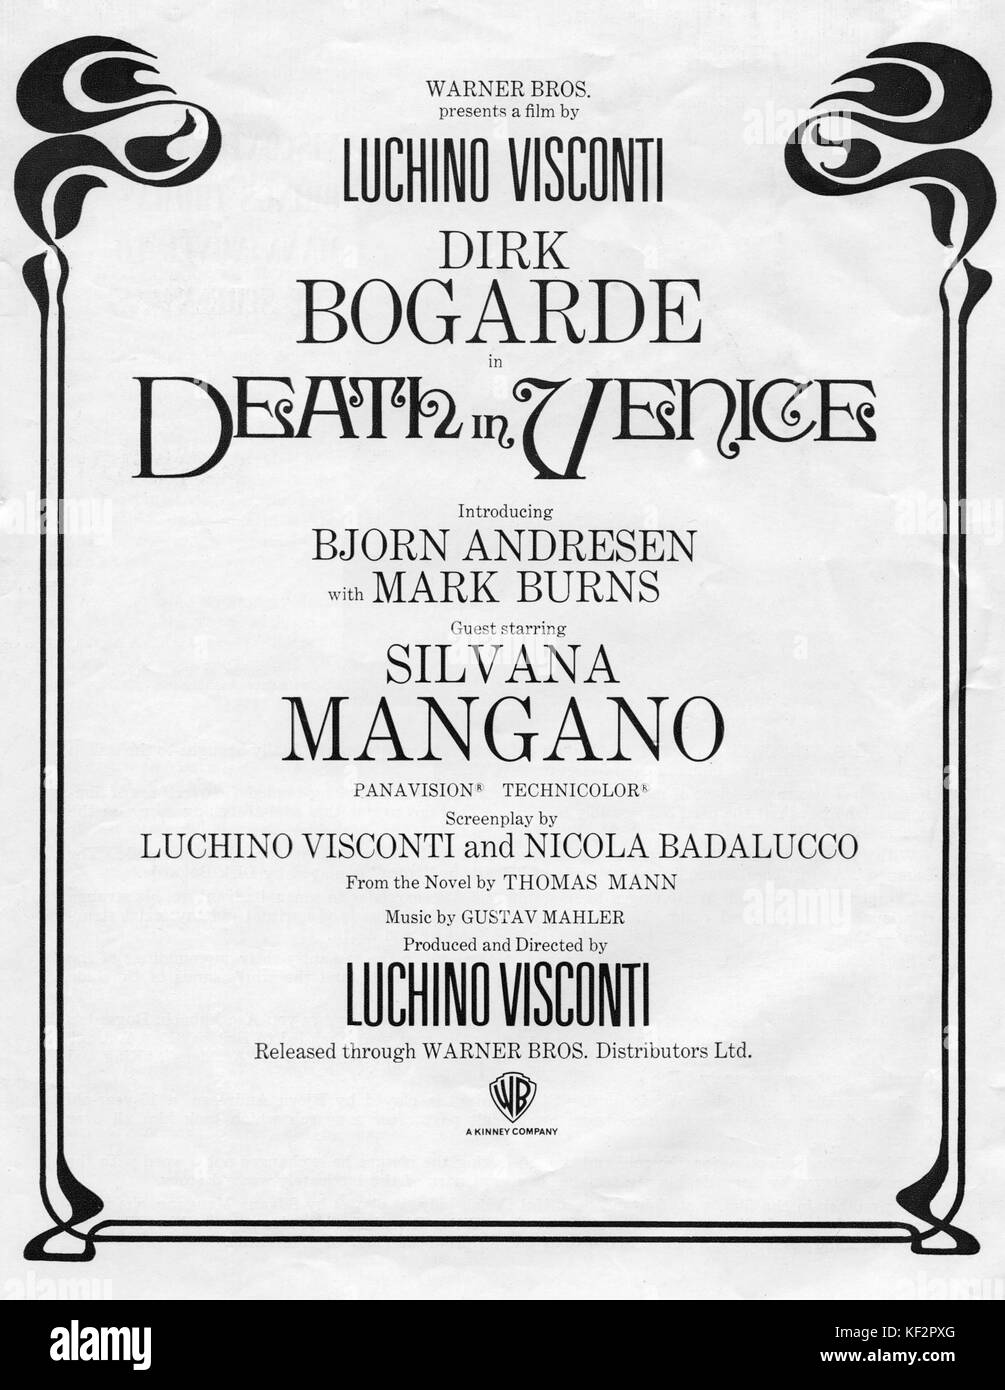 Film programme for ' Death in Venice ' (Morte a Venezia) 1971. Reads: ' Warner Bros. presents a film by Luchino Visconti with Dirk Bogarde in Death in Venice, introducing Bjorn Andresen and Mark Burns. Guest Starring Silvana Mangano. Screenplay by Luchino Visconti and Nicola Badalucco. From the novel by Thomas Mann. Music by Gustav Mahler. Produced and directed by Luchino Visconti. ' LV: 2 November 1906 - 17 March 1976, Italian screenwriter, theatre, opera, and cinema director. Stock Photo